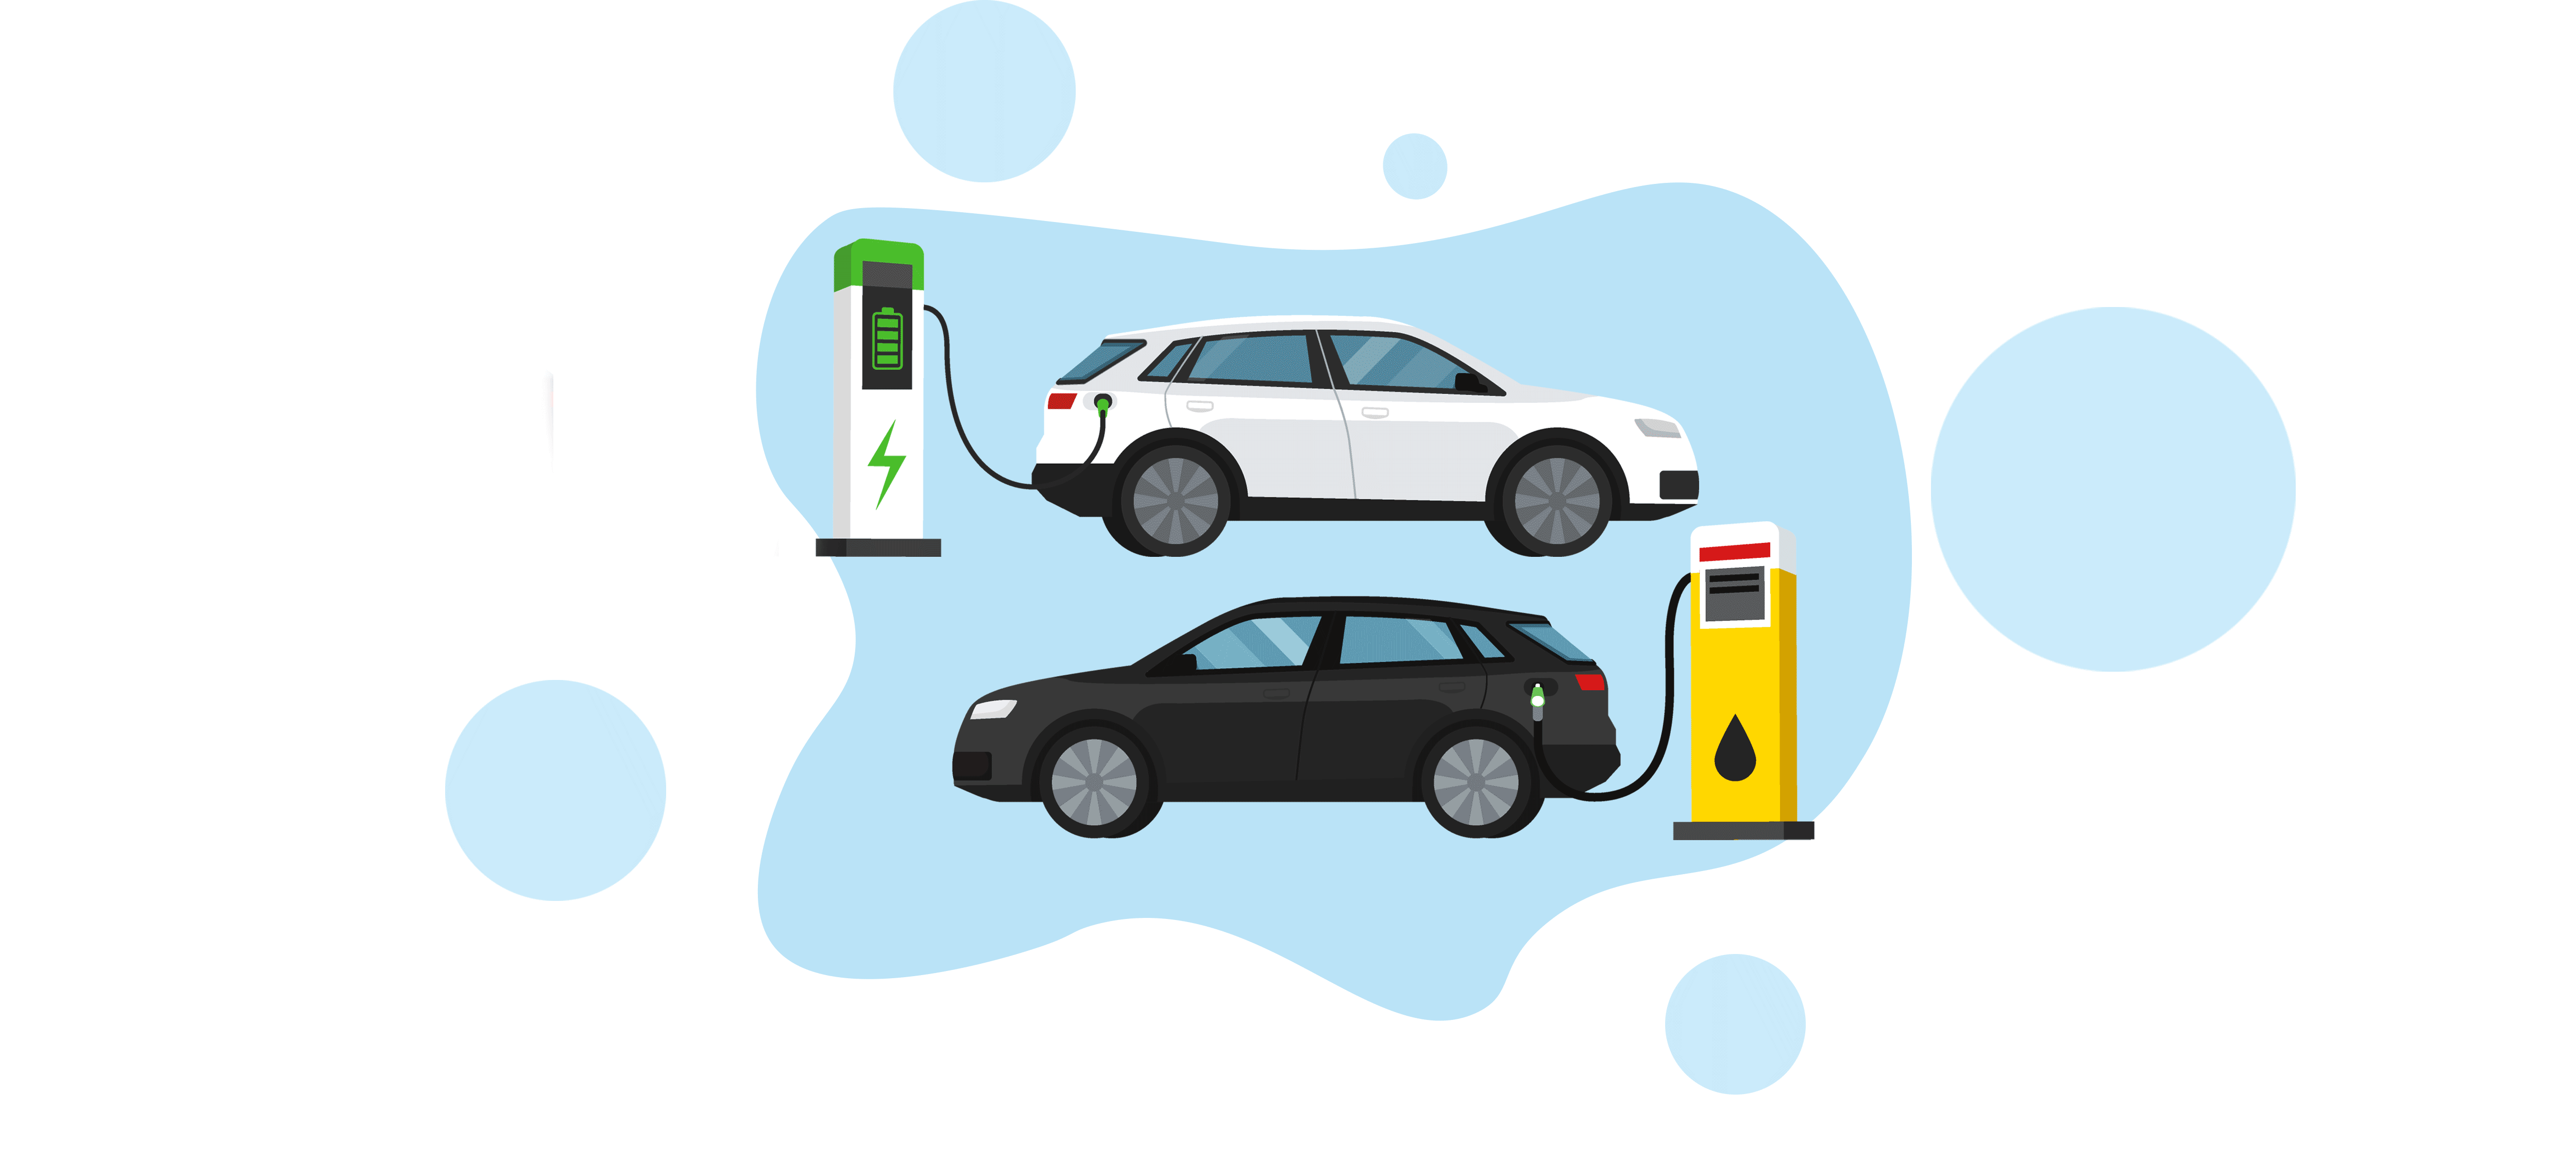 An illustration of an electric car being charged and a fuel car getting petrol at the bowser.